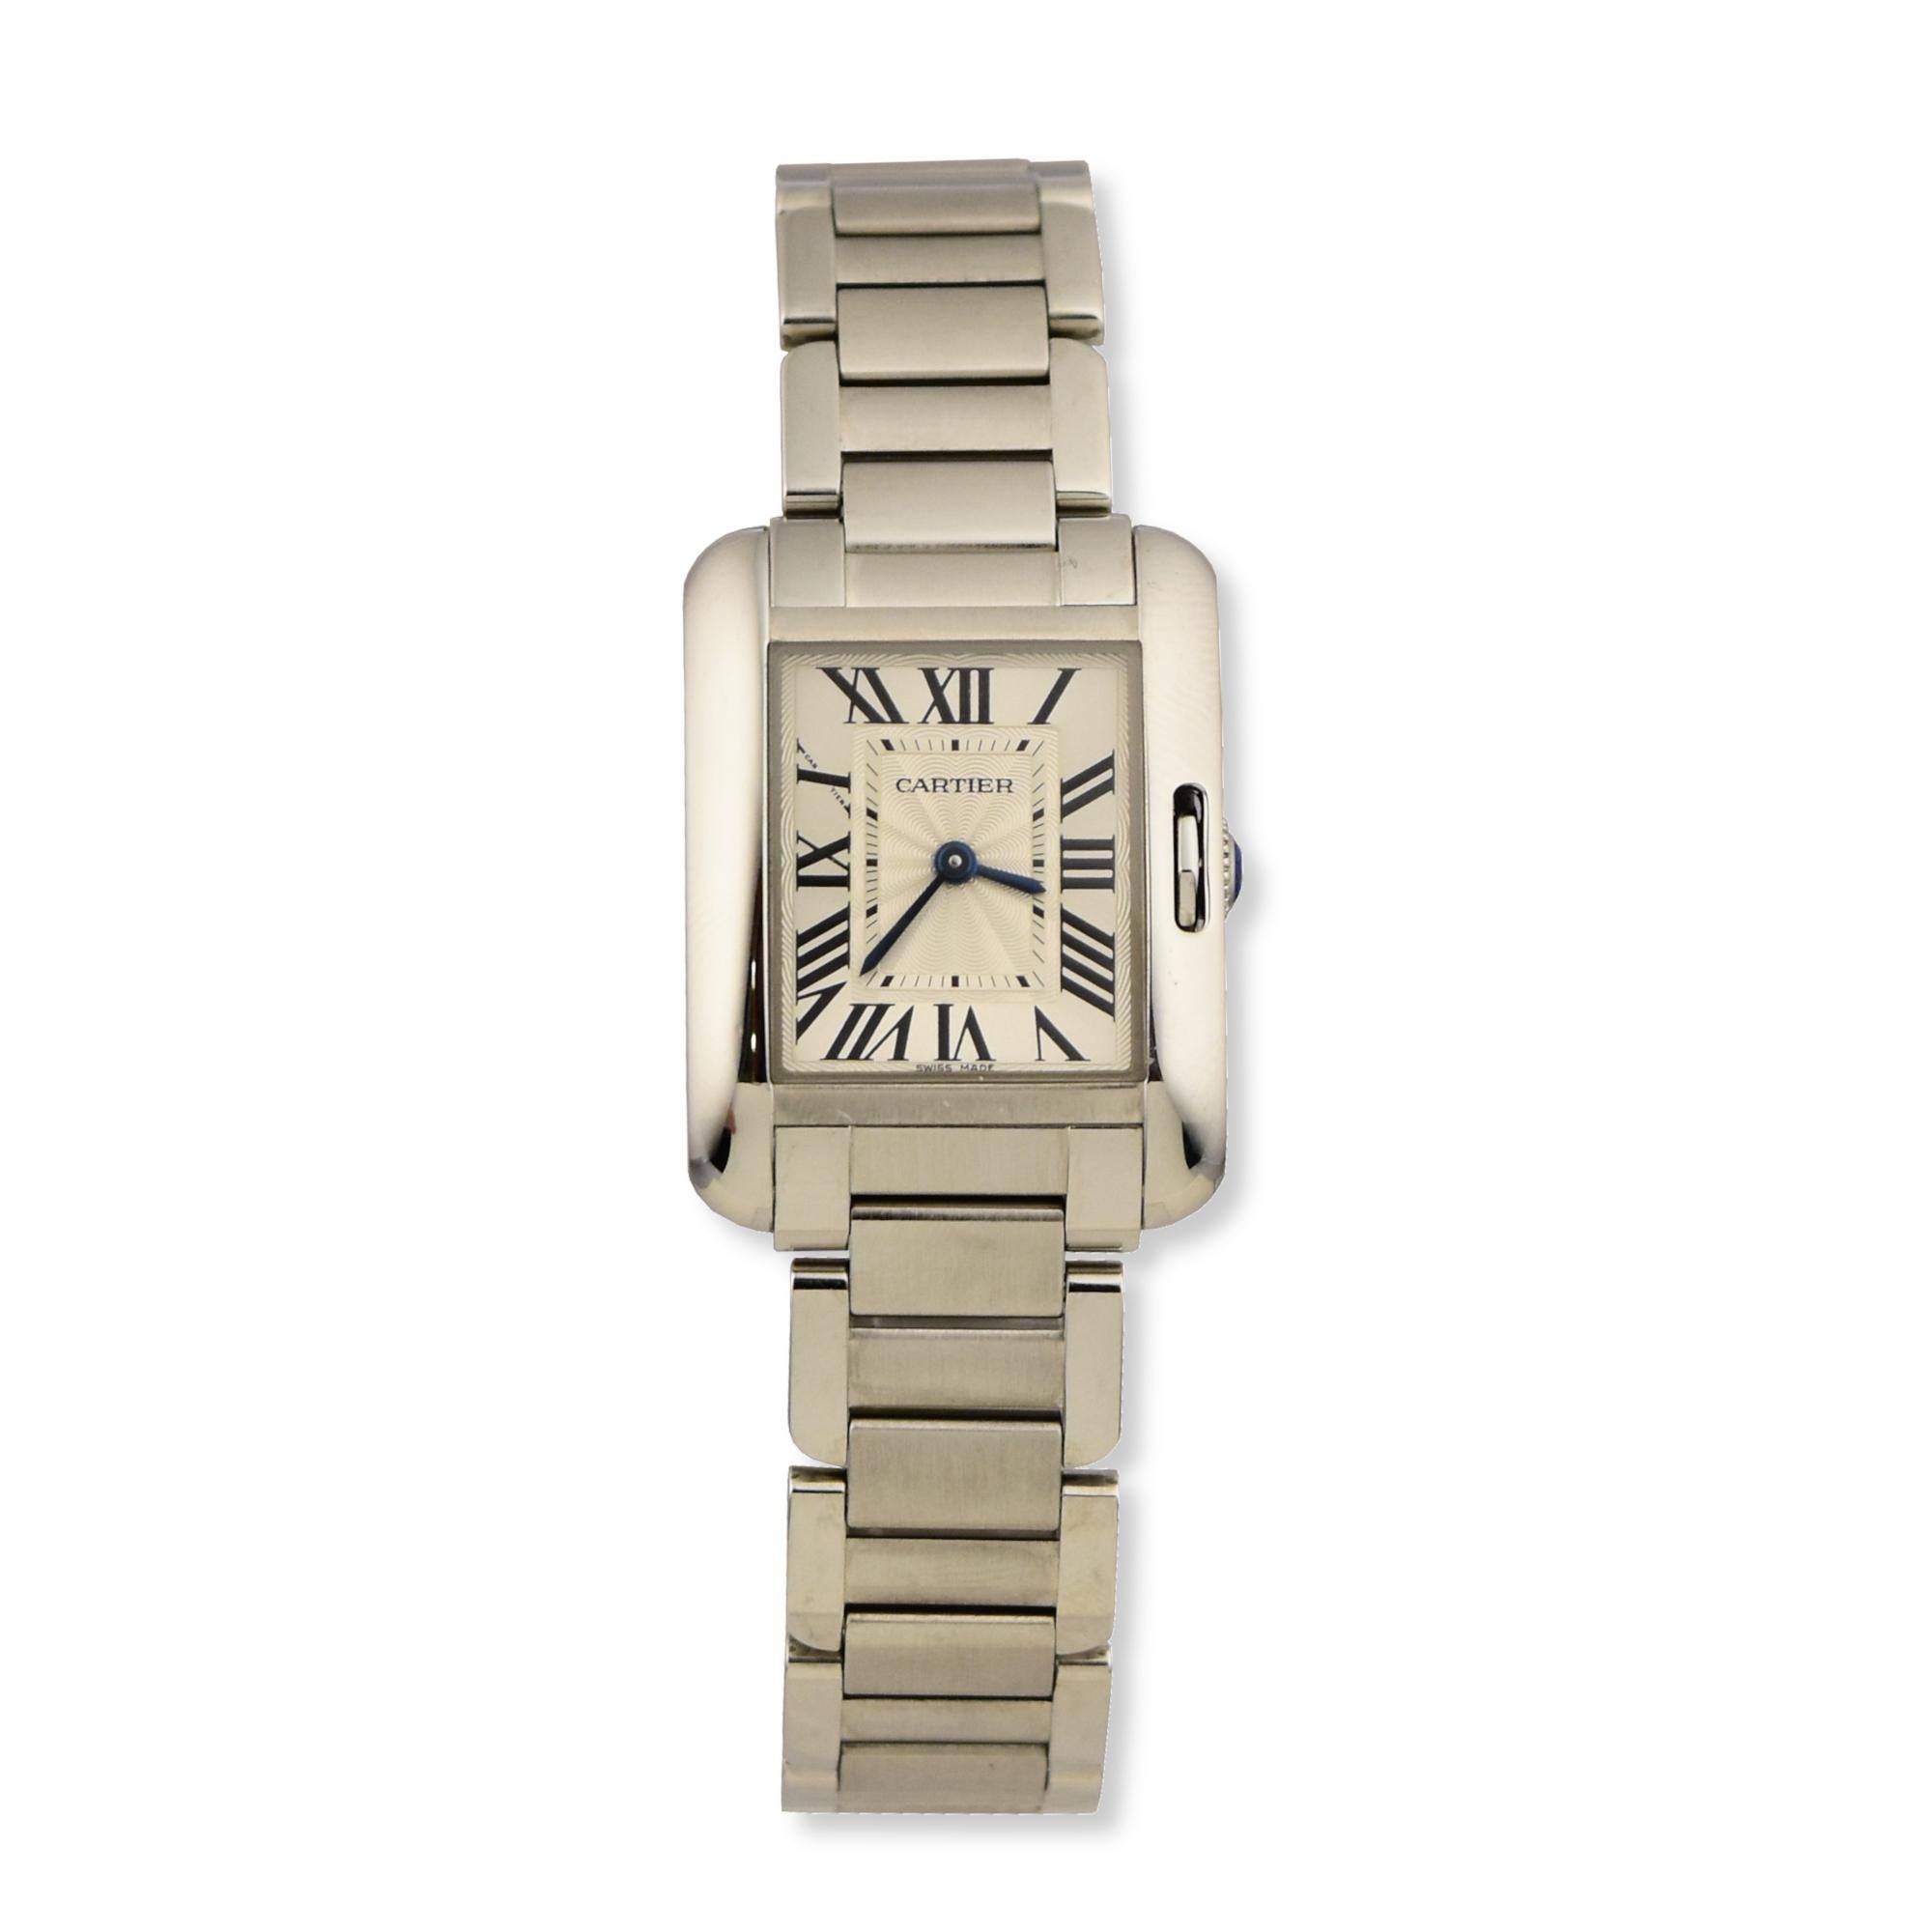 Brand: Cartier

Model: Tank Anglaise 

Movement: Automatic 

Case Size: 30mm

Dial: Silver 

Case Material: Stainless Steel 

Bracelet Material: Stainless Steel  

Crystal: Scratch-Resistant Sapphire Glass

Includes: 24 Month Brilliance Jewels